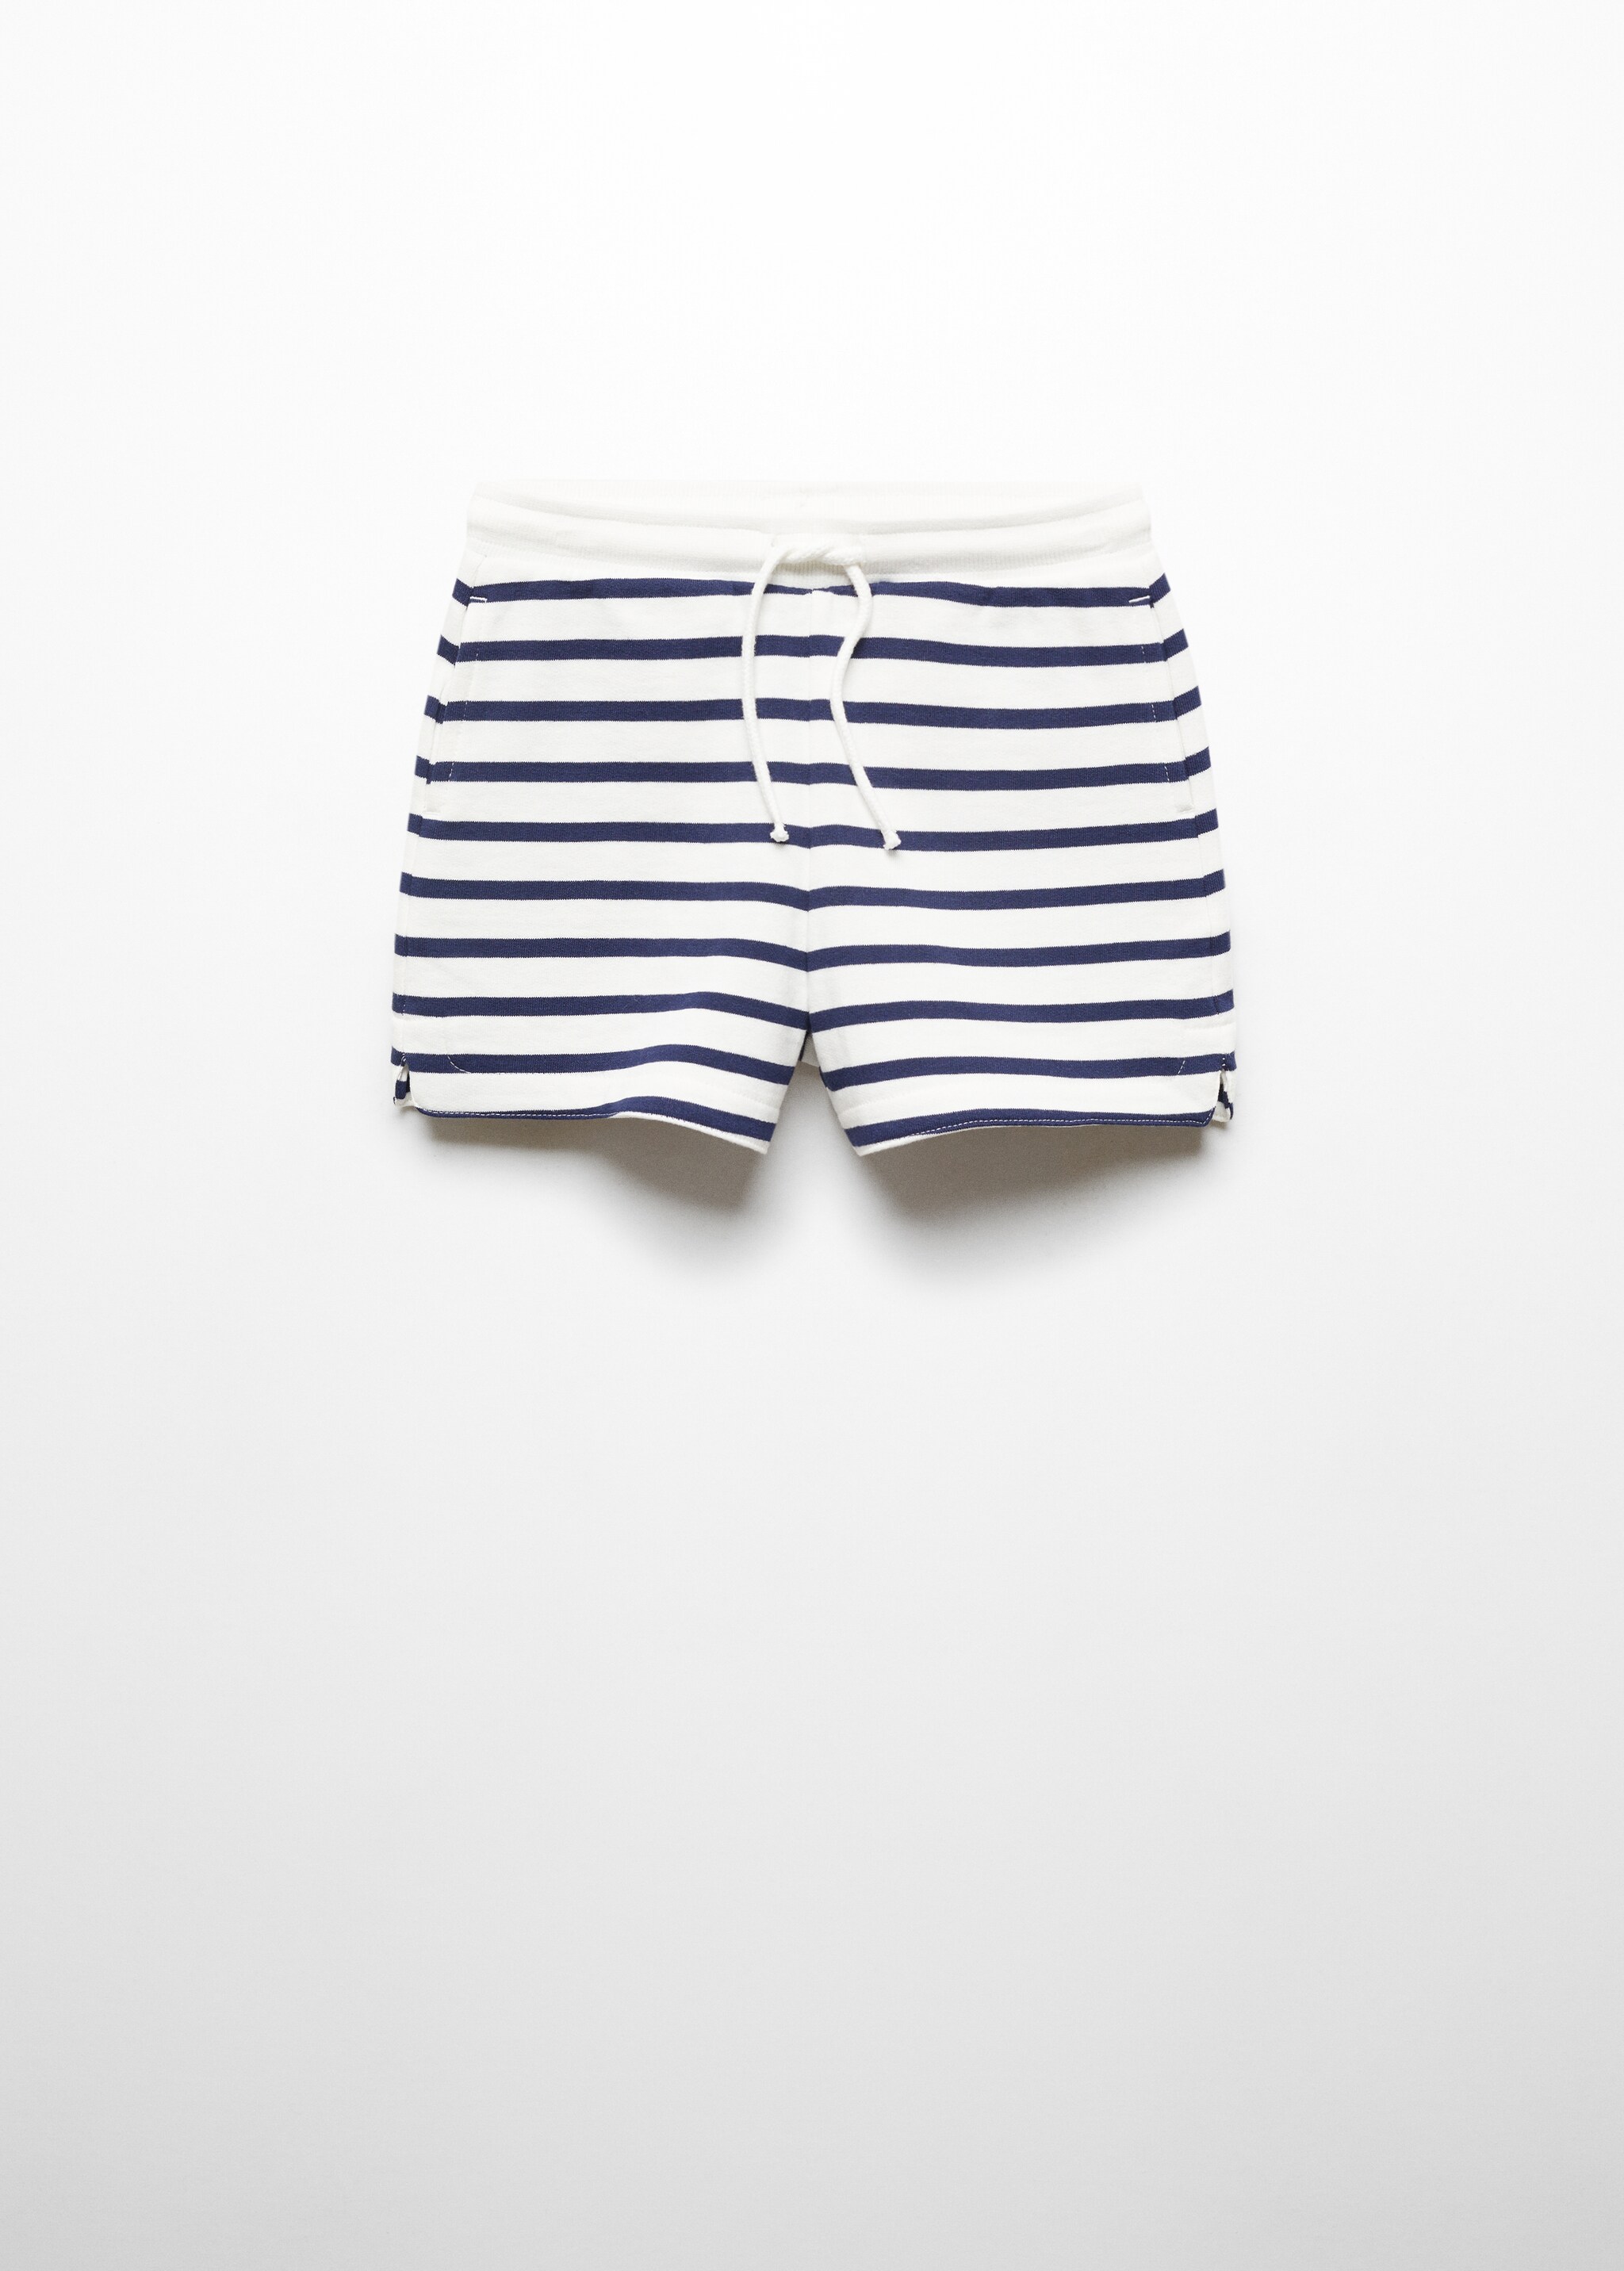 Striped cotton shorts - Article without model